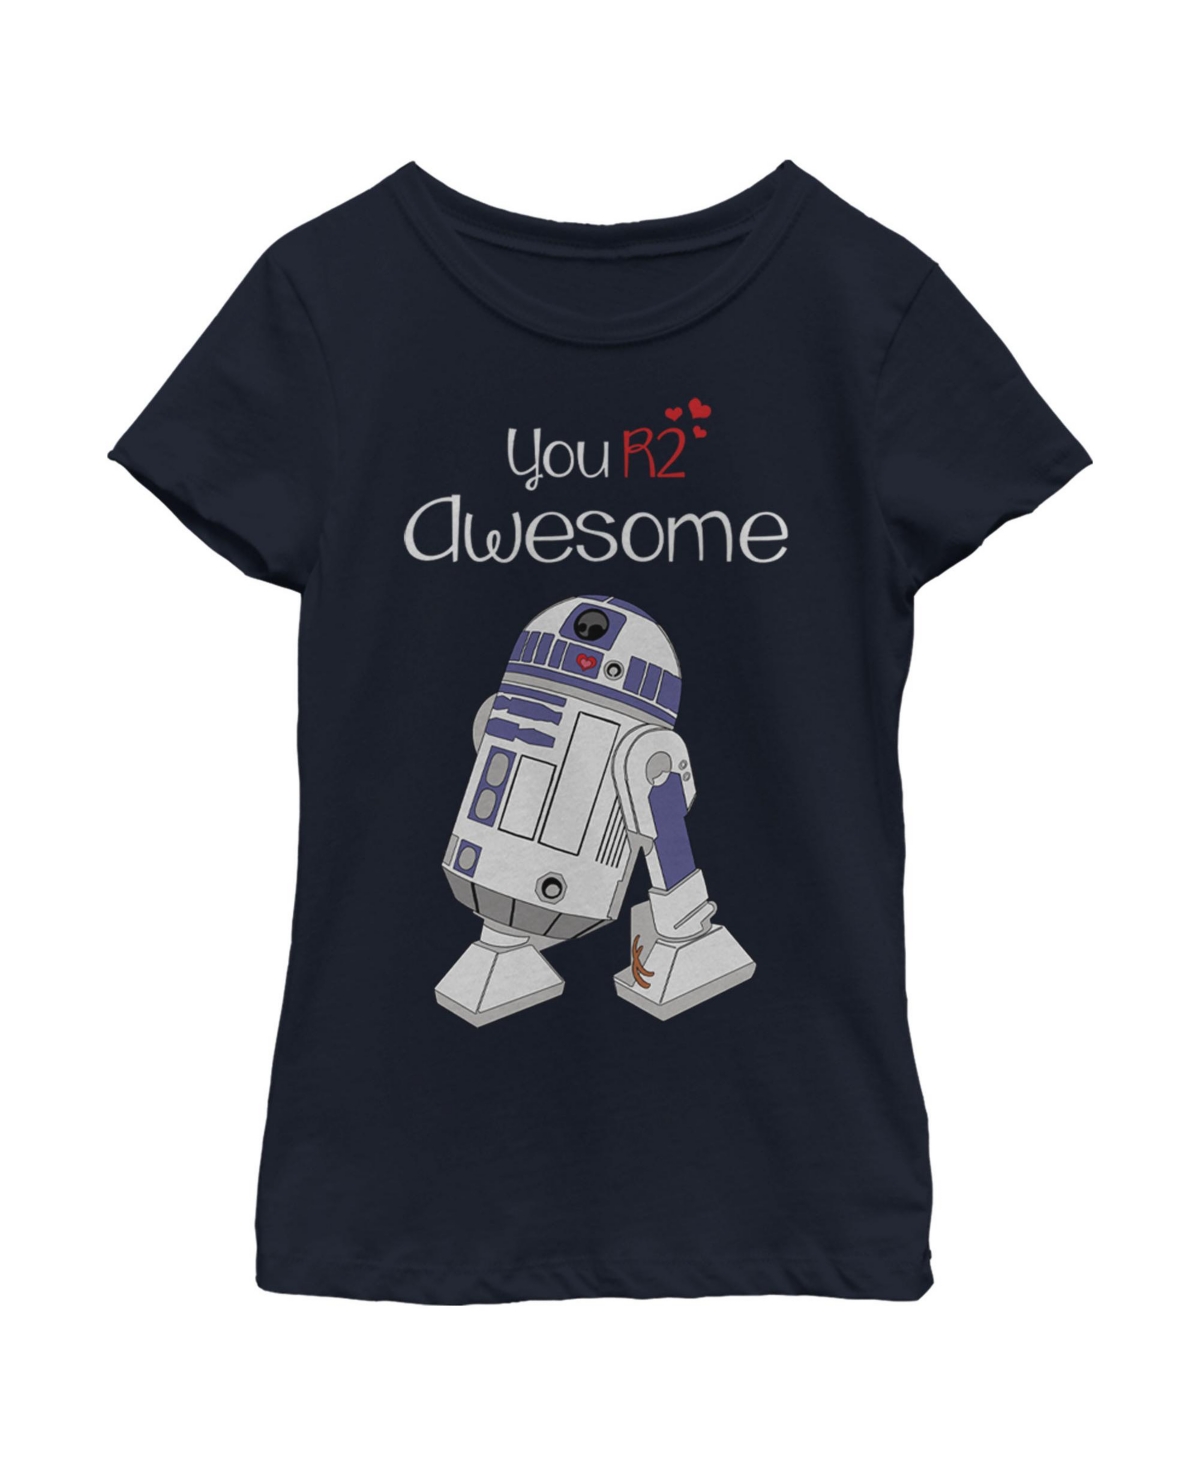 Disney Lucasfilm Kids' Girl's Star Wars Valentine's Day You R2 Awesome Child T-shirt In Navy Blue